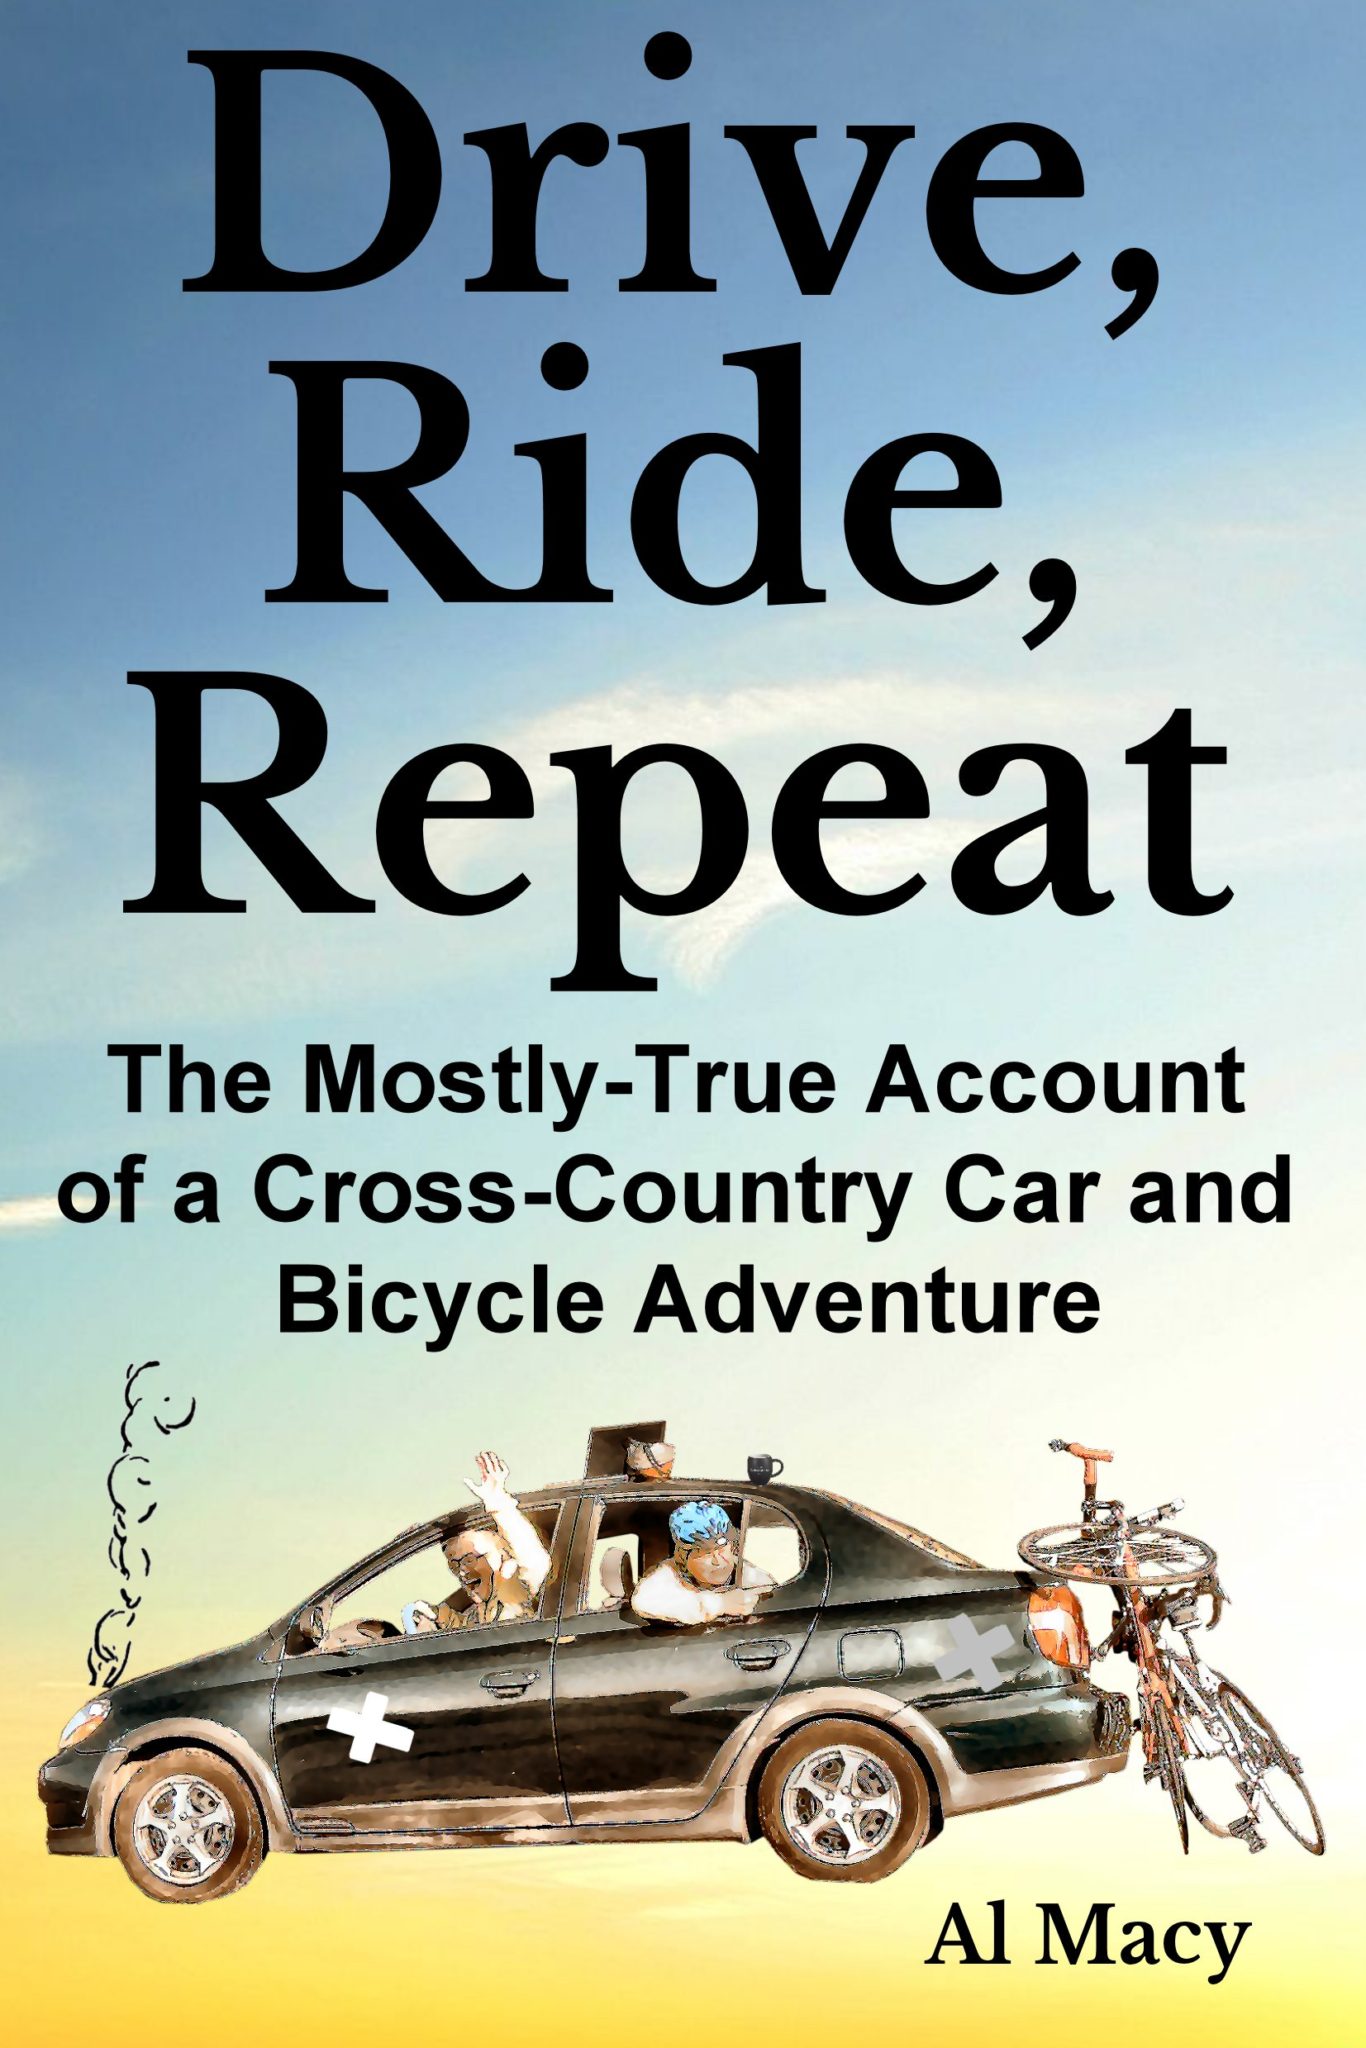 FREE: Drive, Ride, Repeat: The Mostly-True Account of a Cross-Country Car and Bicycle Adventure by Al Macy